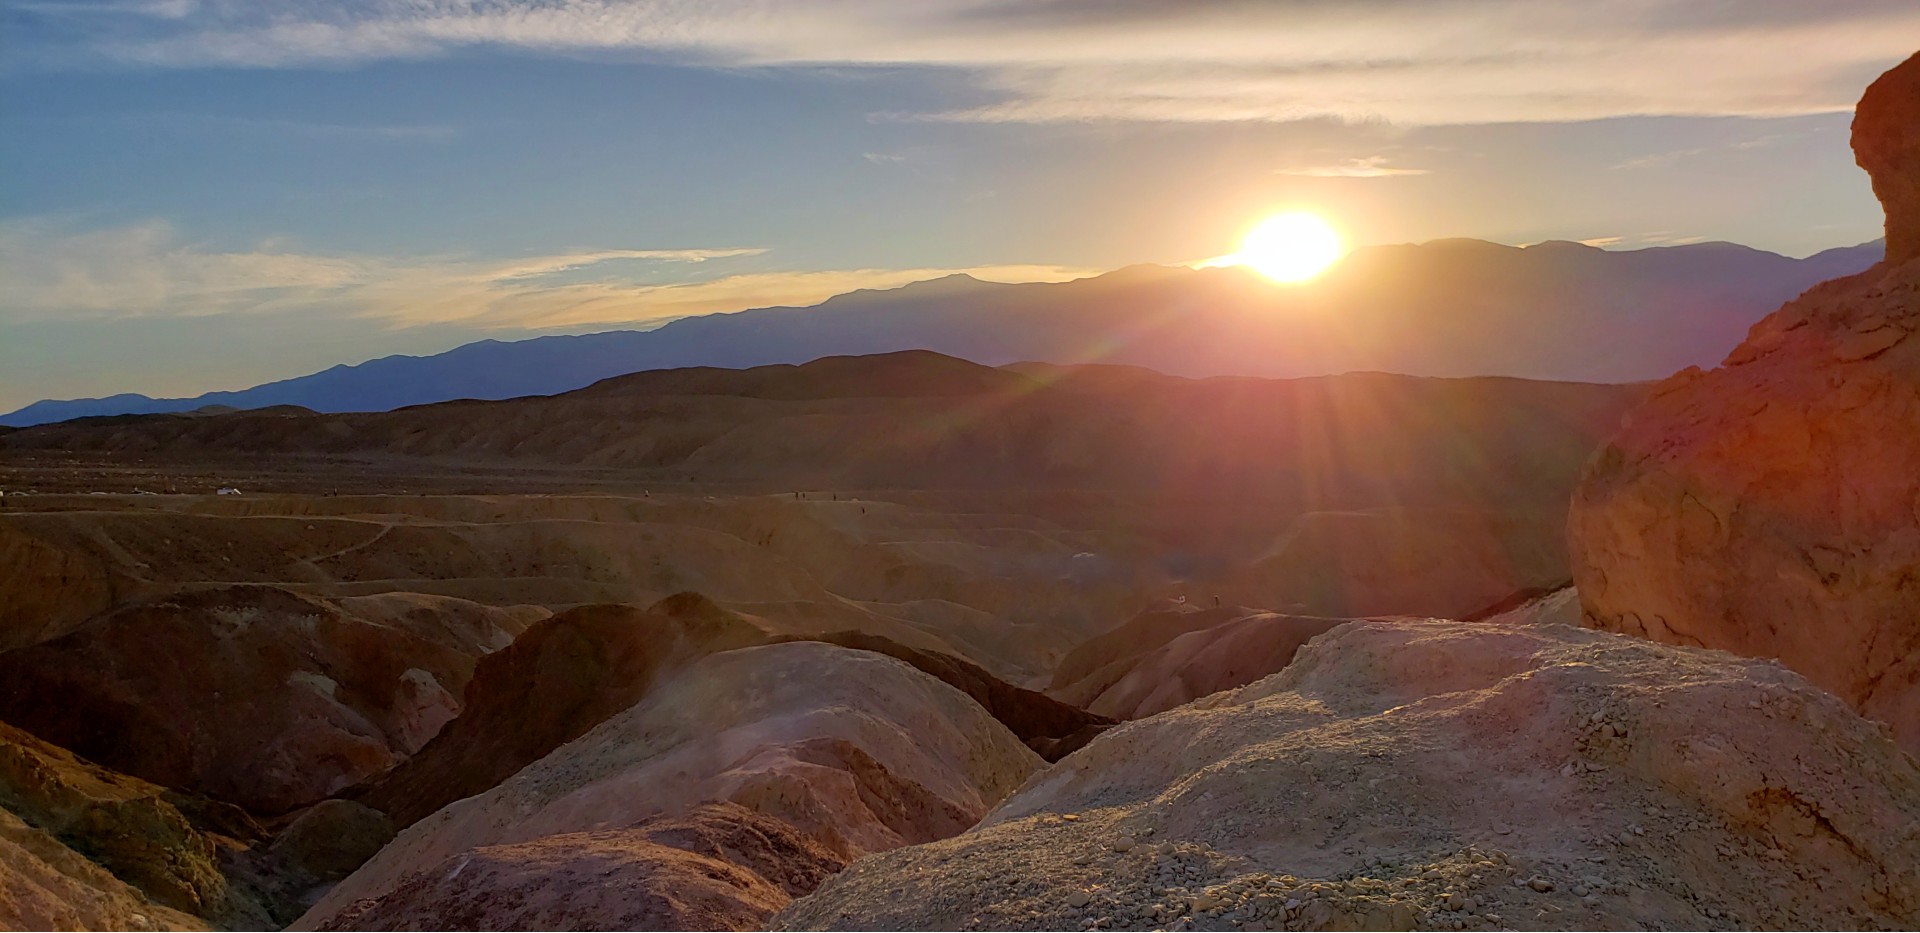 sunset at death valley national park